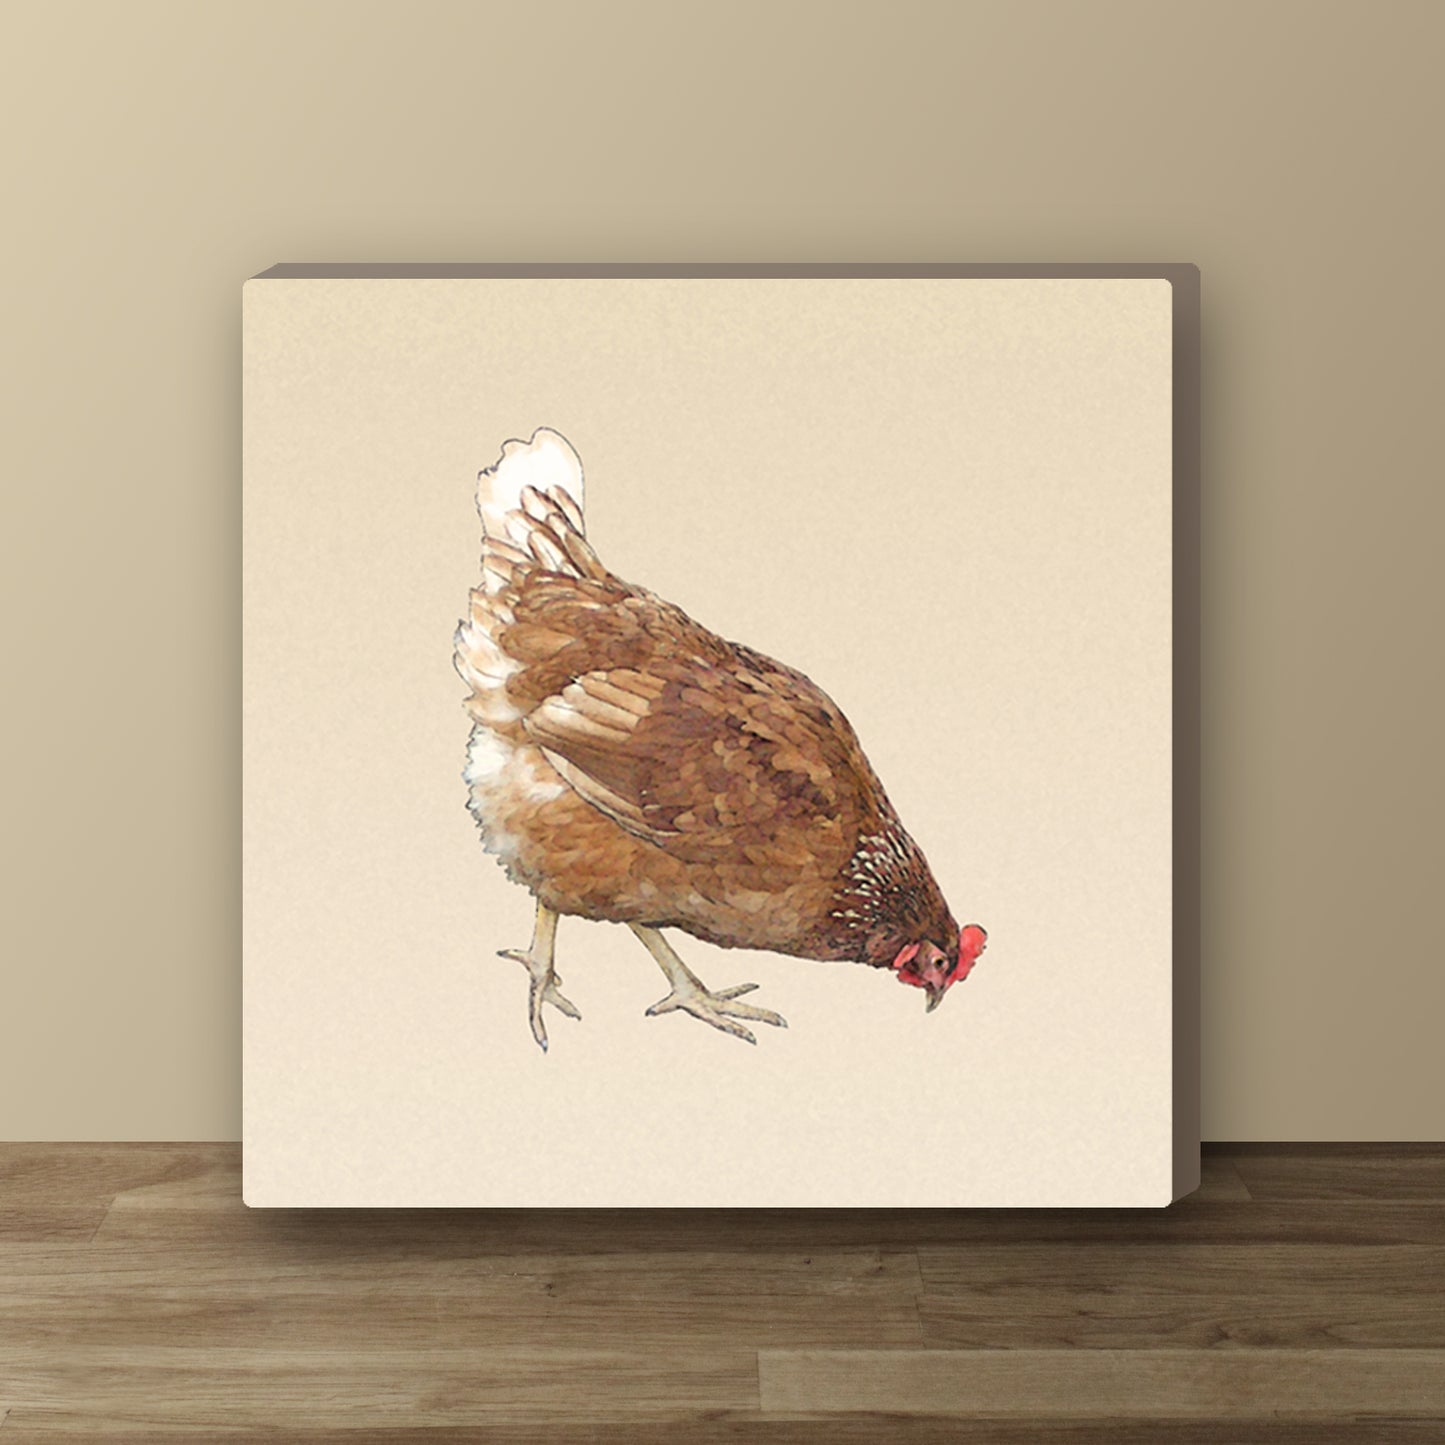 Set of 3 Chicken Wrapped Canvas Prints